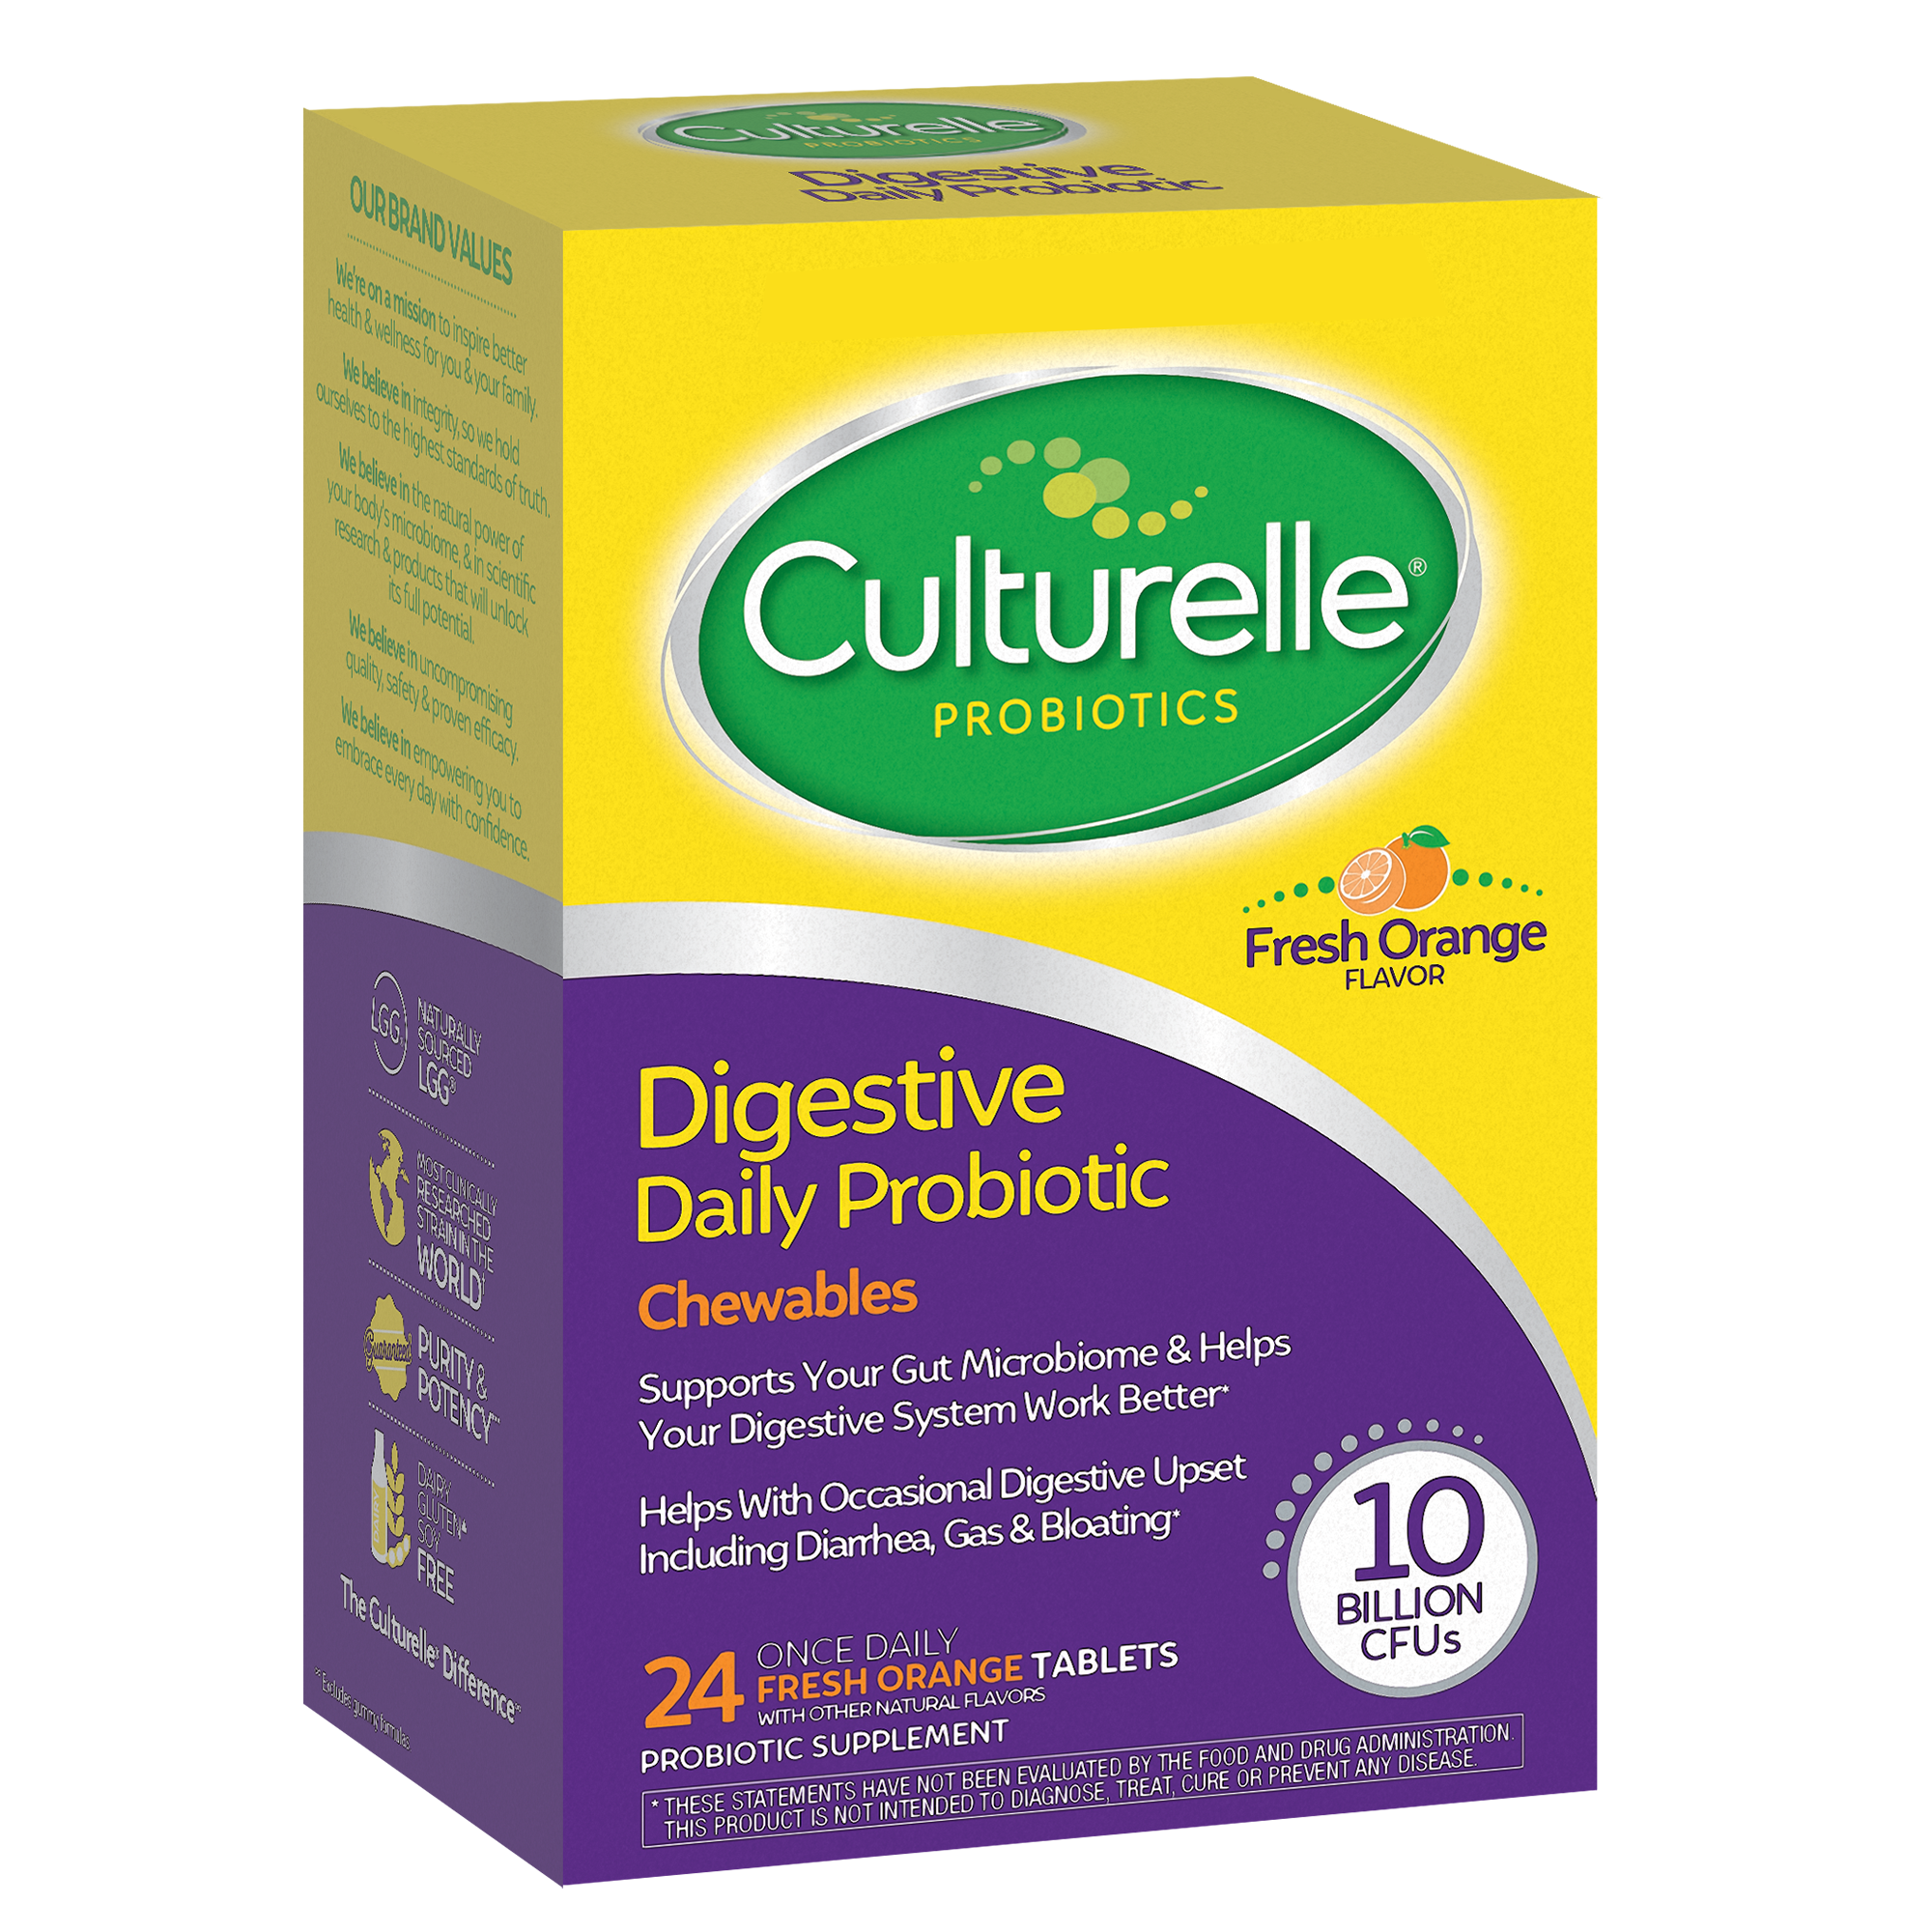 Culturelle Digestive Daily Probiotic Chewable Tablets for Digestive Health, Fresh Orange, 24 Count - image 3 of 10